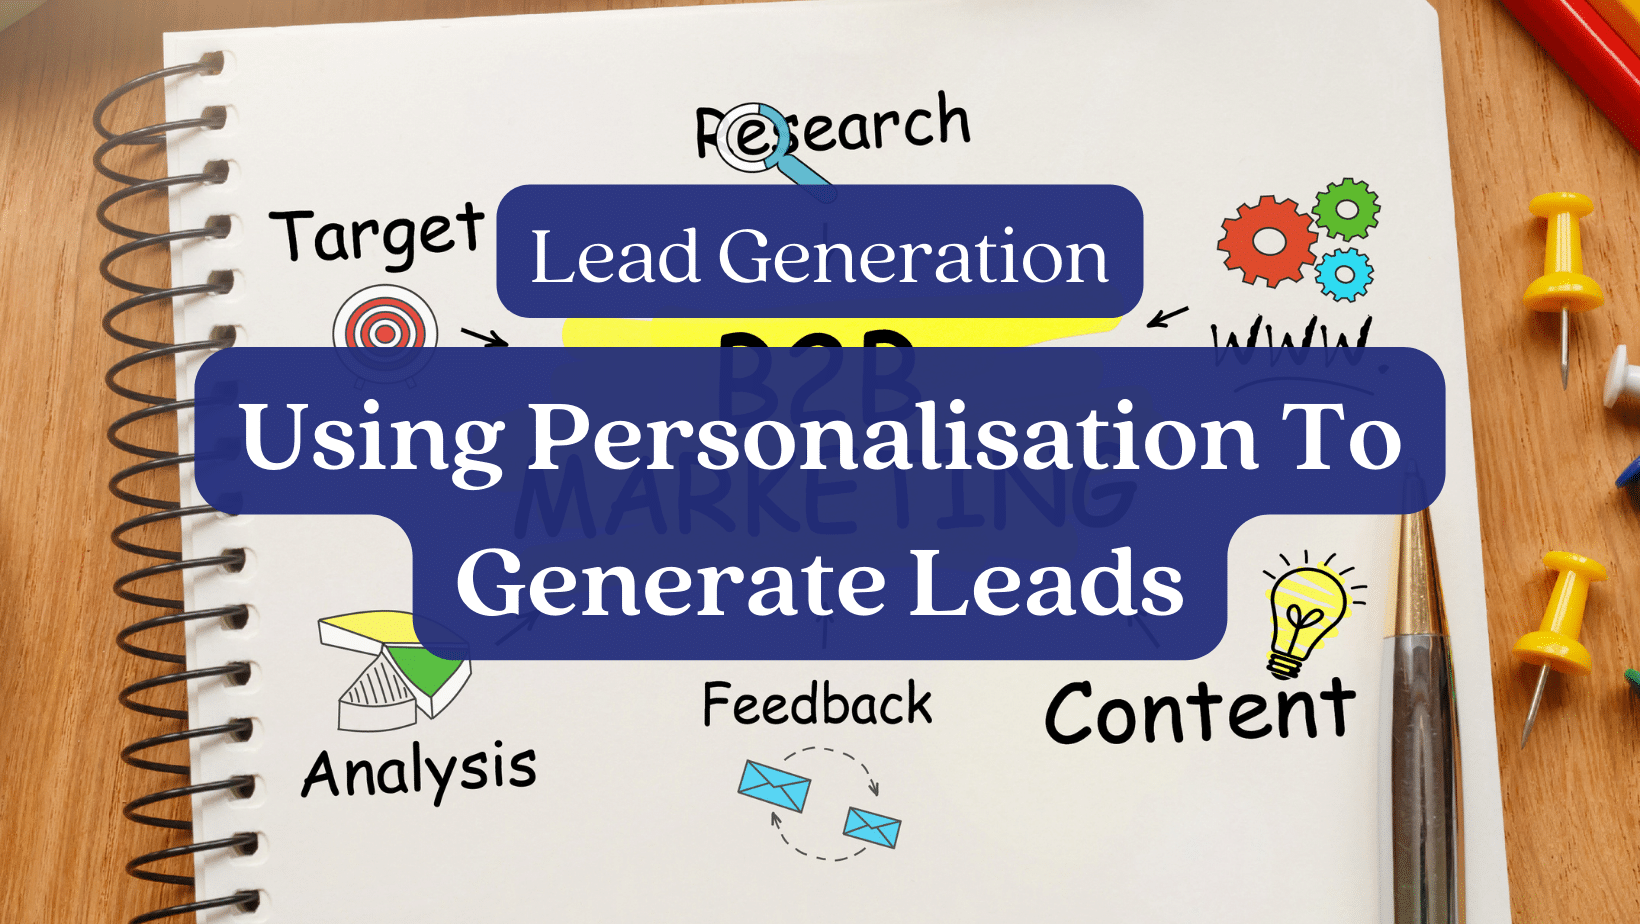 Lead Generation: Using Personalisation To Generate Leads